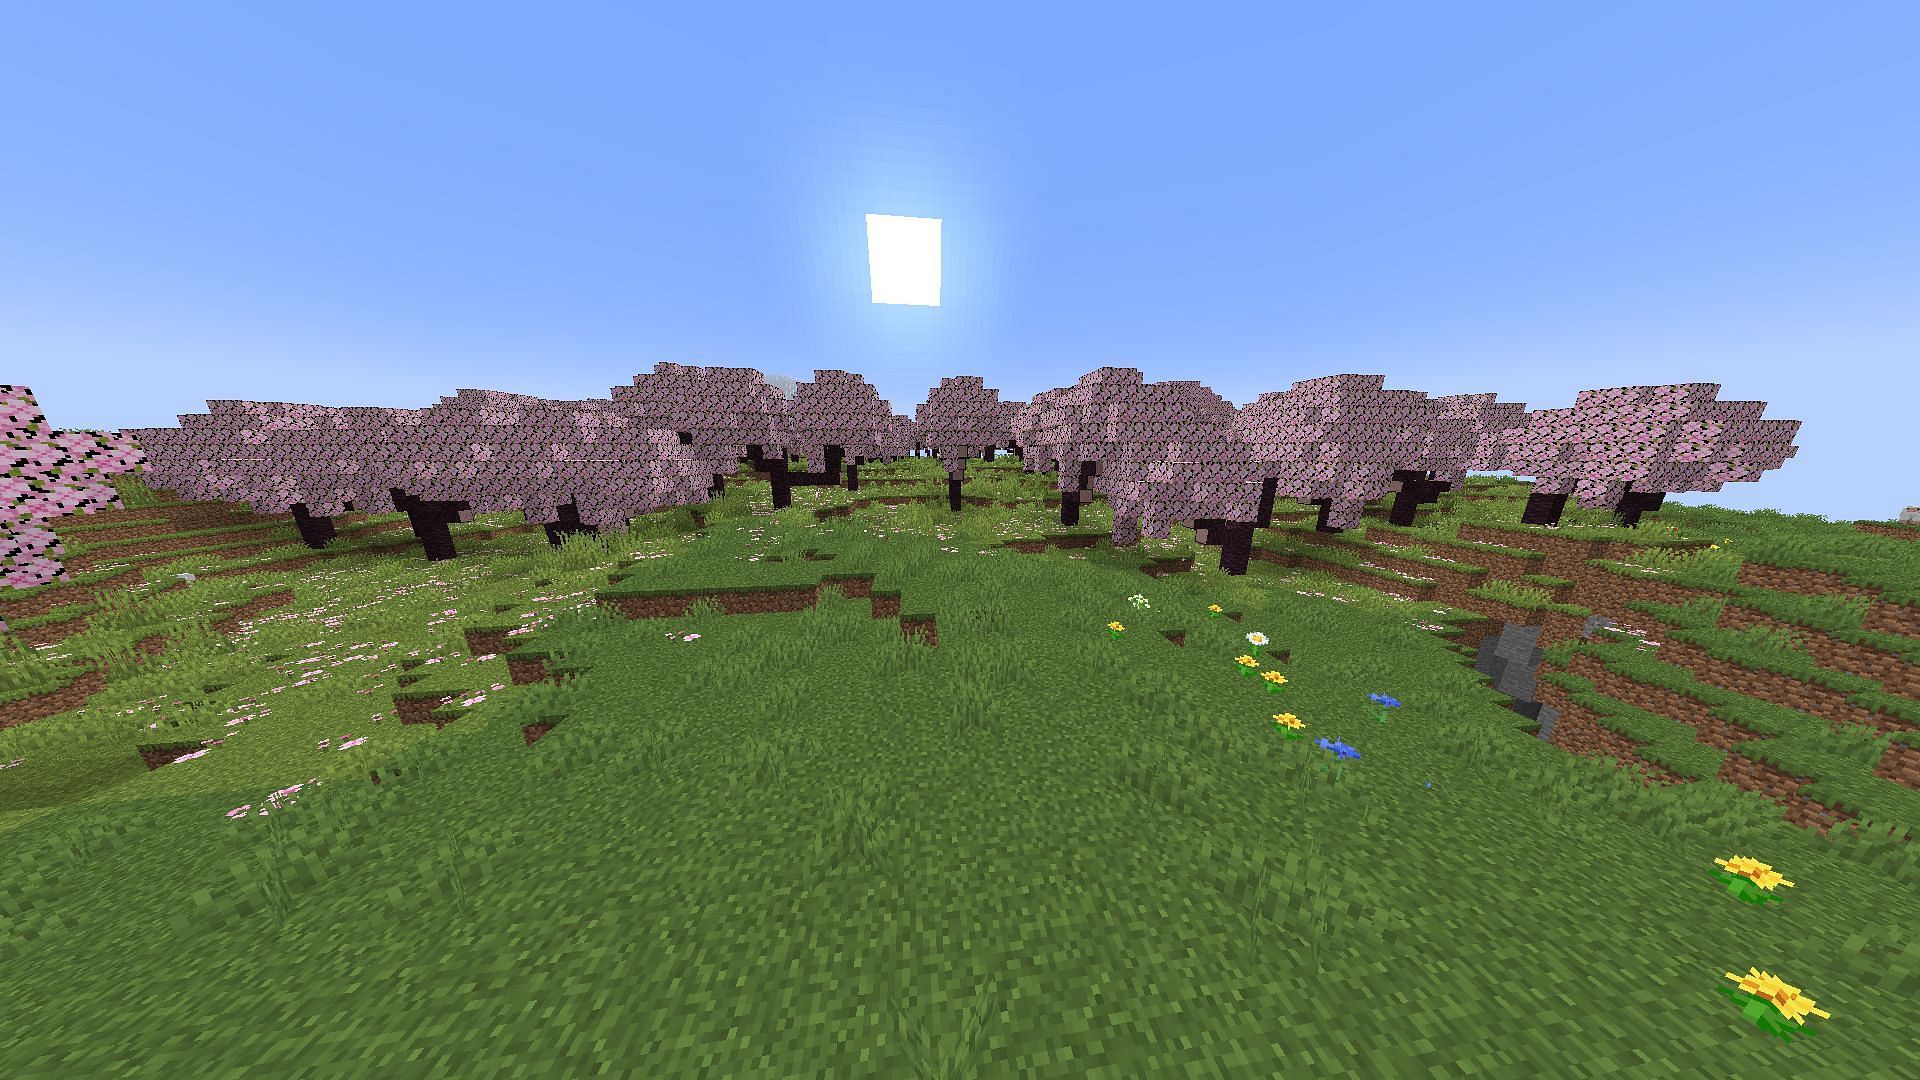 This seed is excellent for capturing content (Image via Mojang)